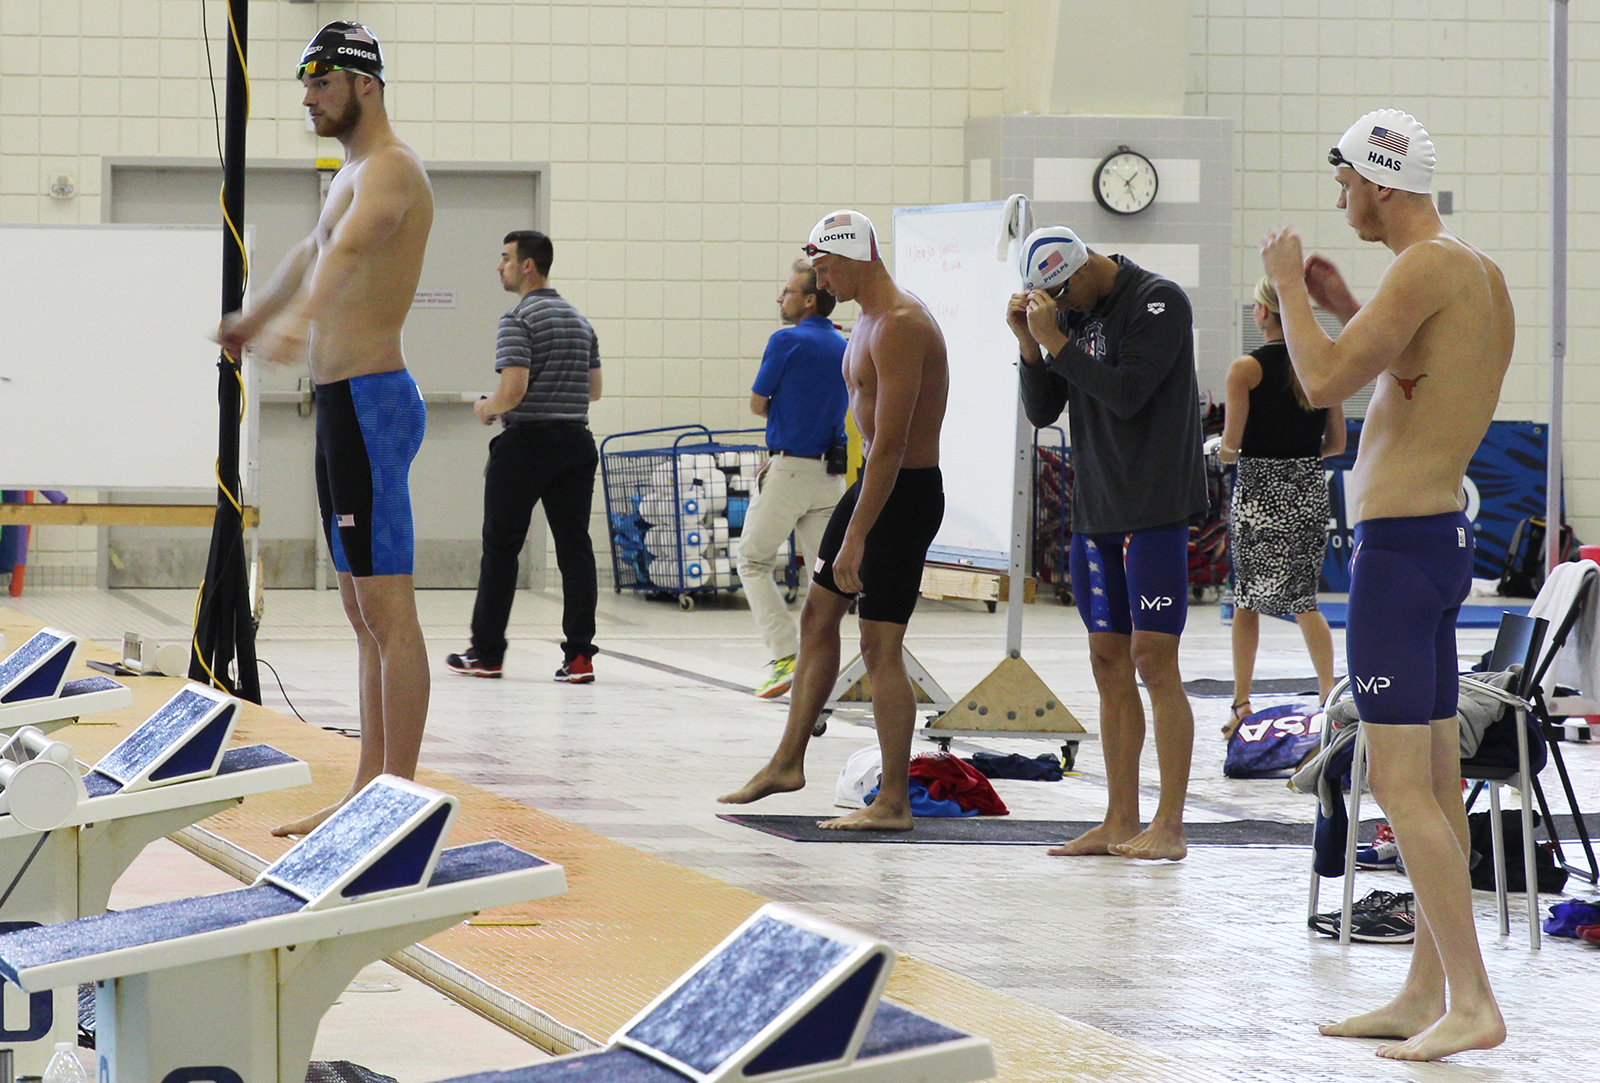 Jack Conger, Ryan Lochte, Michael Phelps, and Townley Haas prepare to swim at an open practice at Georgia Tech's McAuley Aquatic Center on July 30, 2016